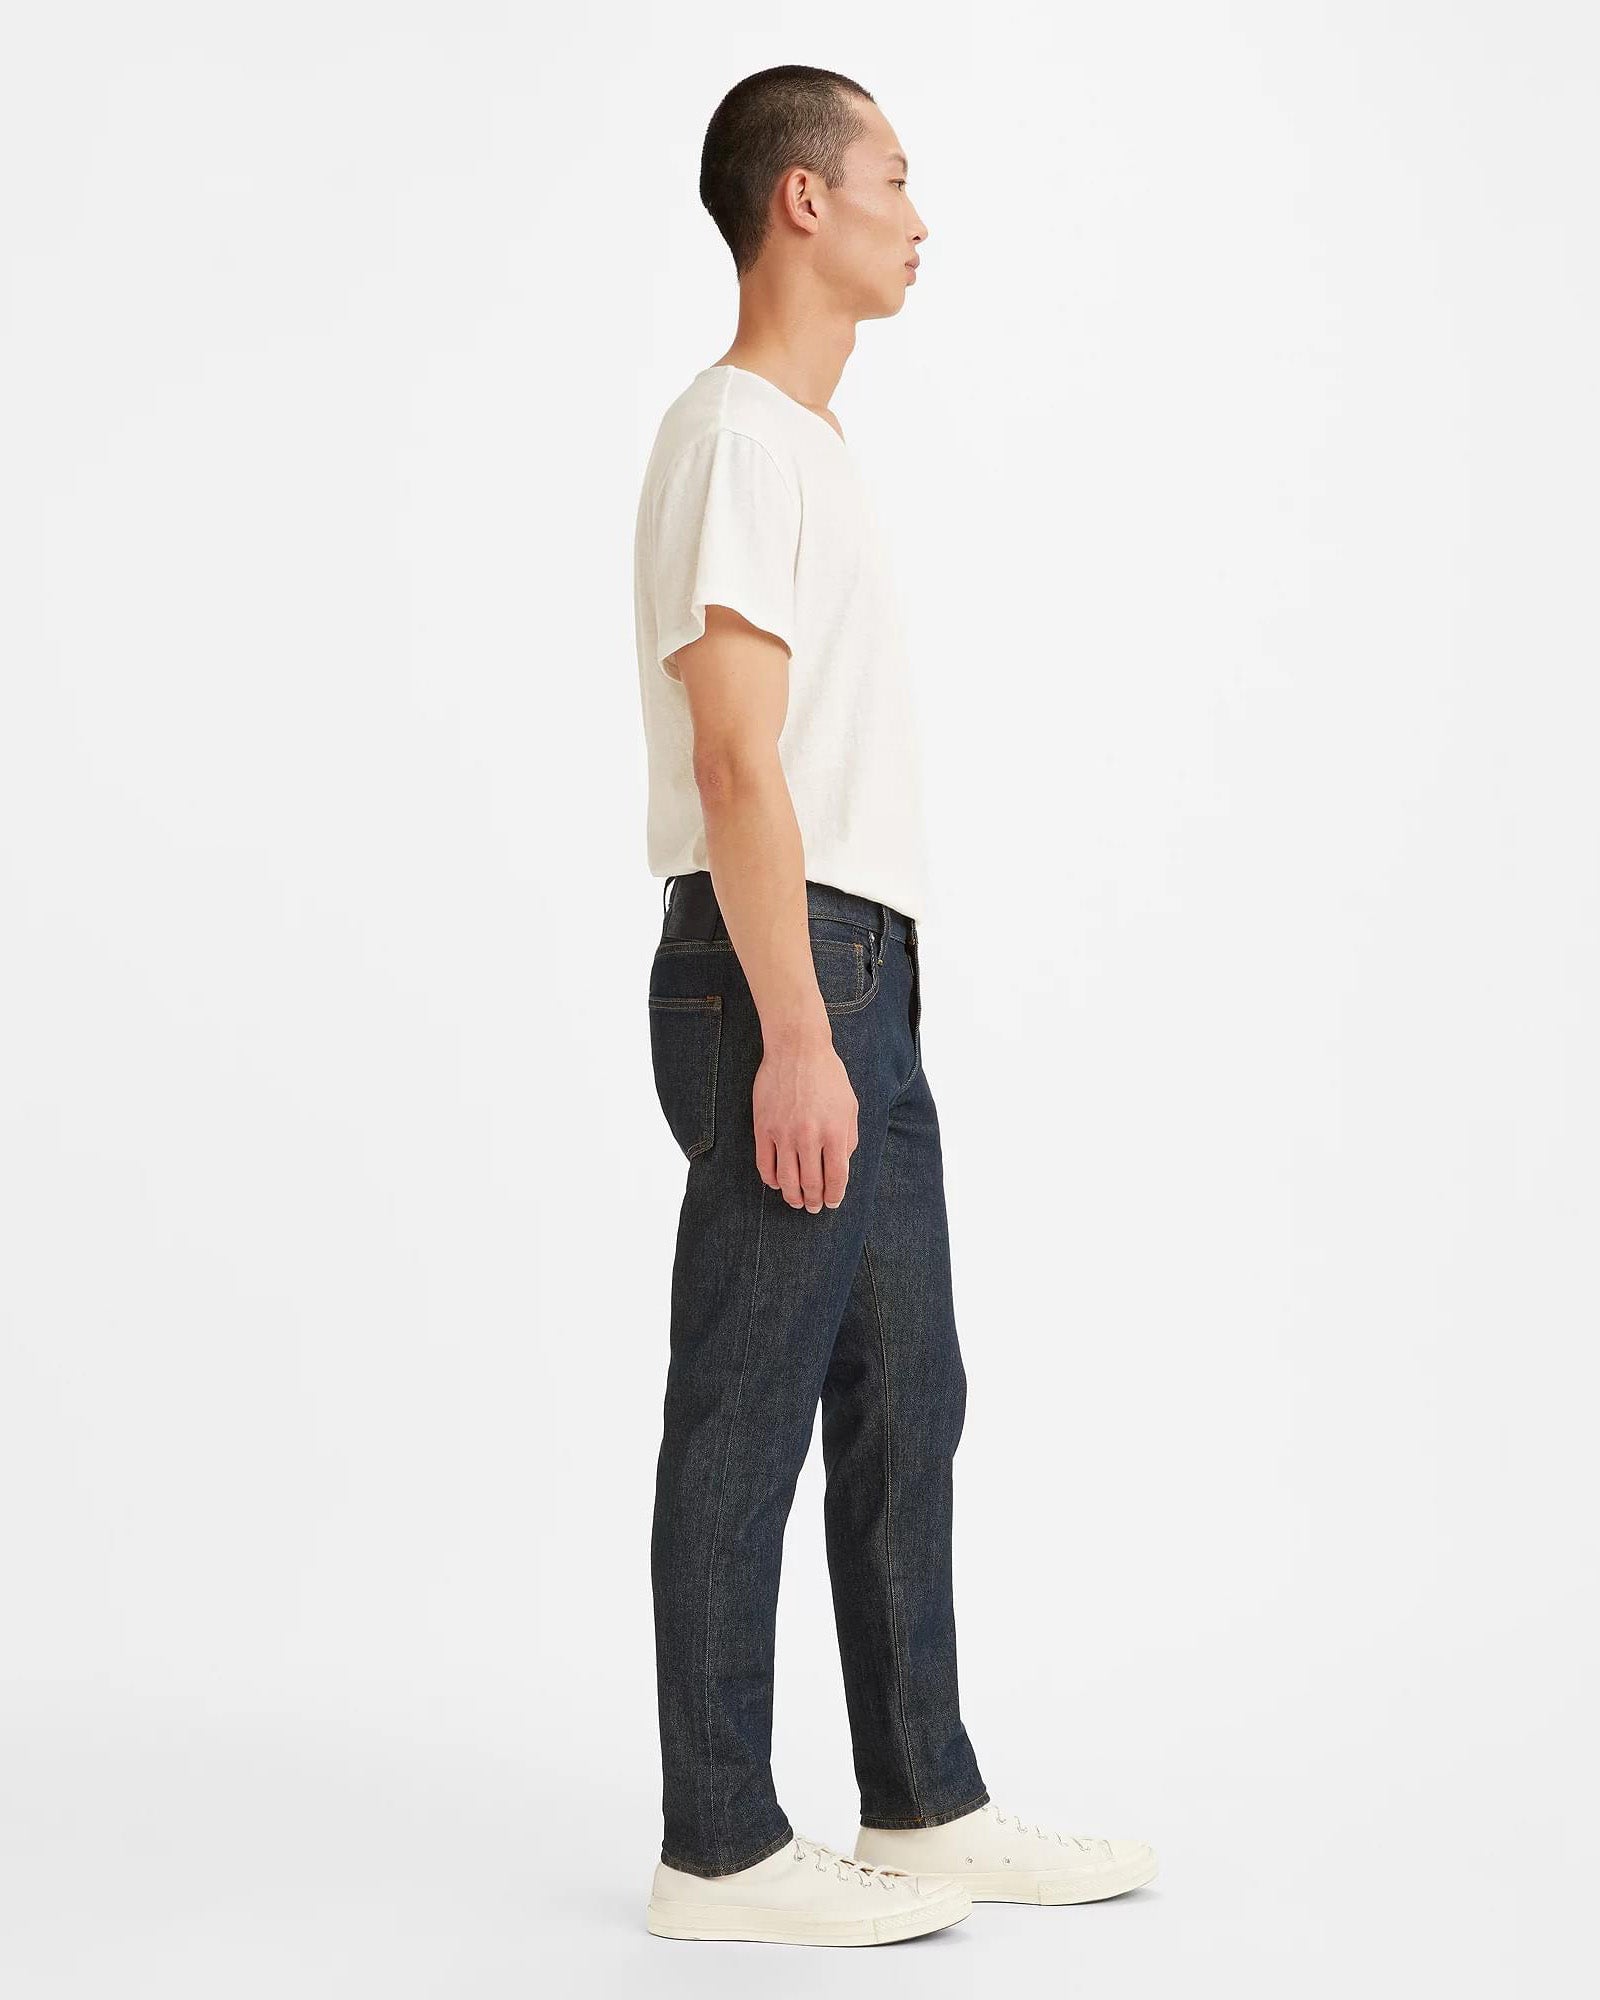 Levi's® Made & Crafted® 512 Selvedge Slim Tapered Mens Jeans - Newport